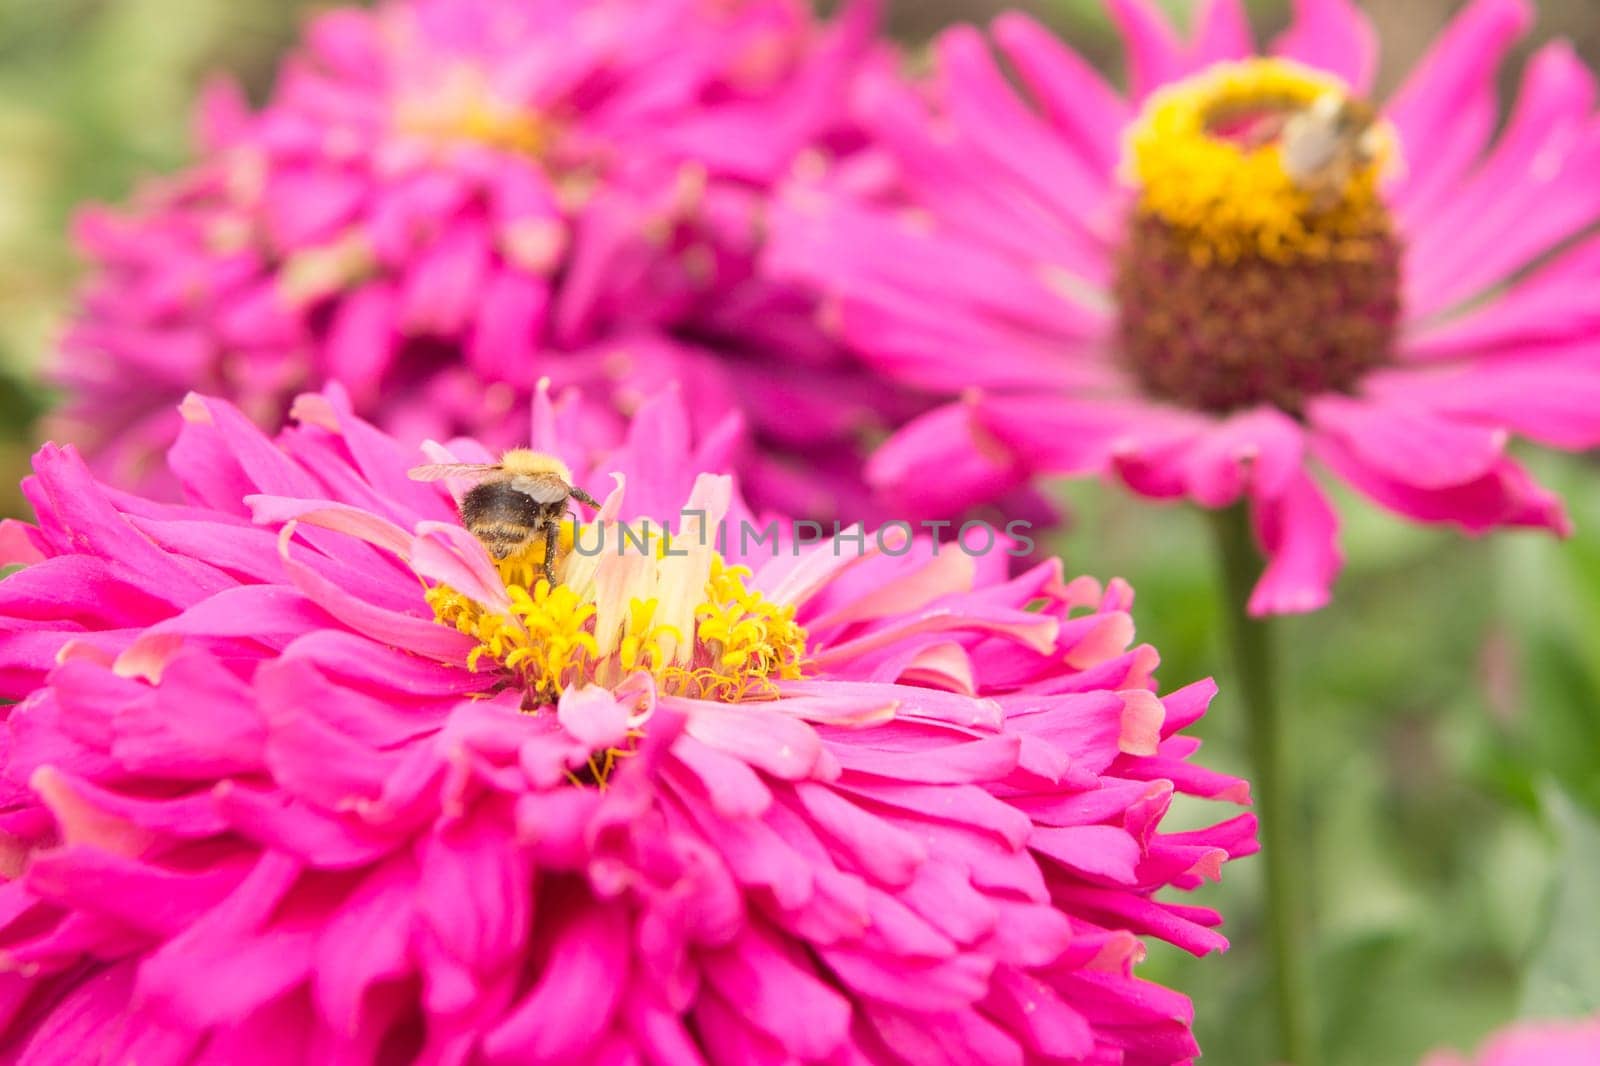 Beautiful pink flowers growing in the garden. Gardening concept, close-up. The flower is pollinated by a bumblebee